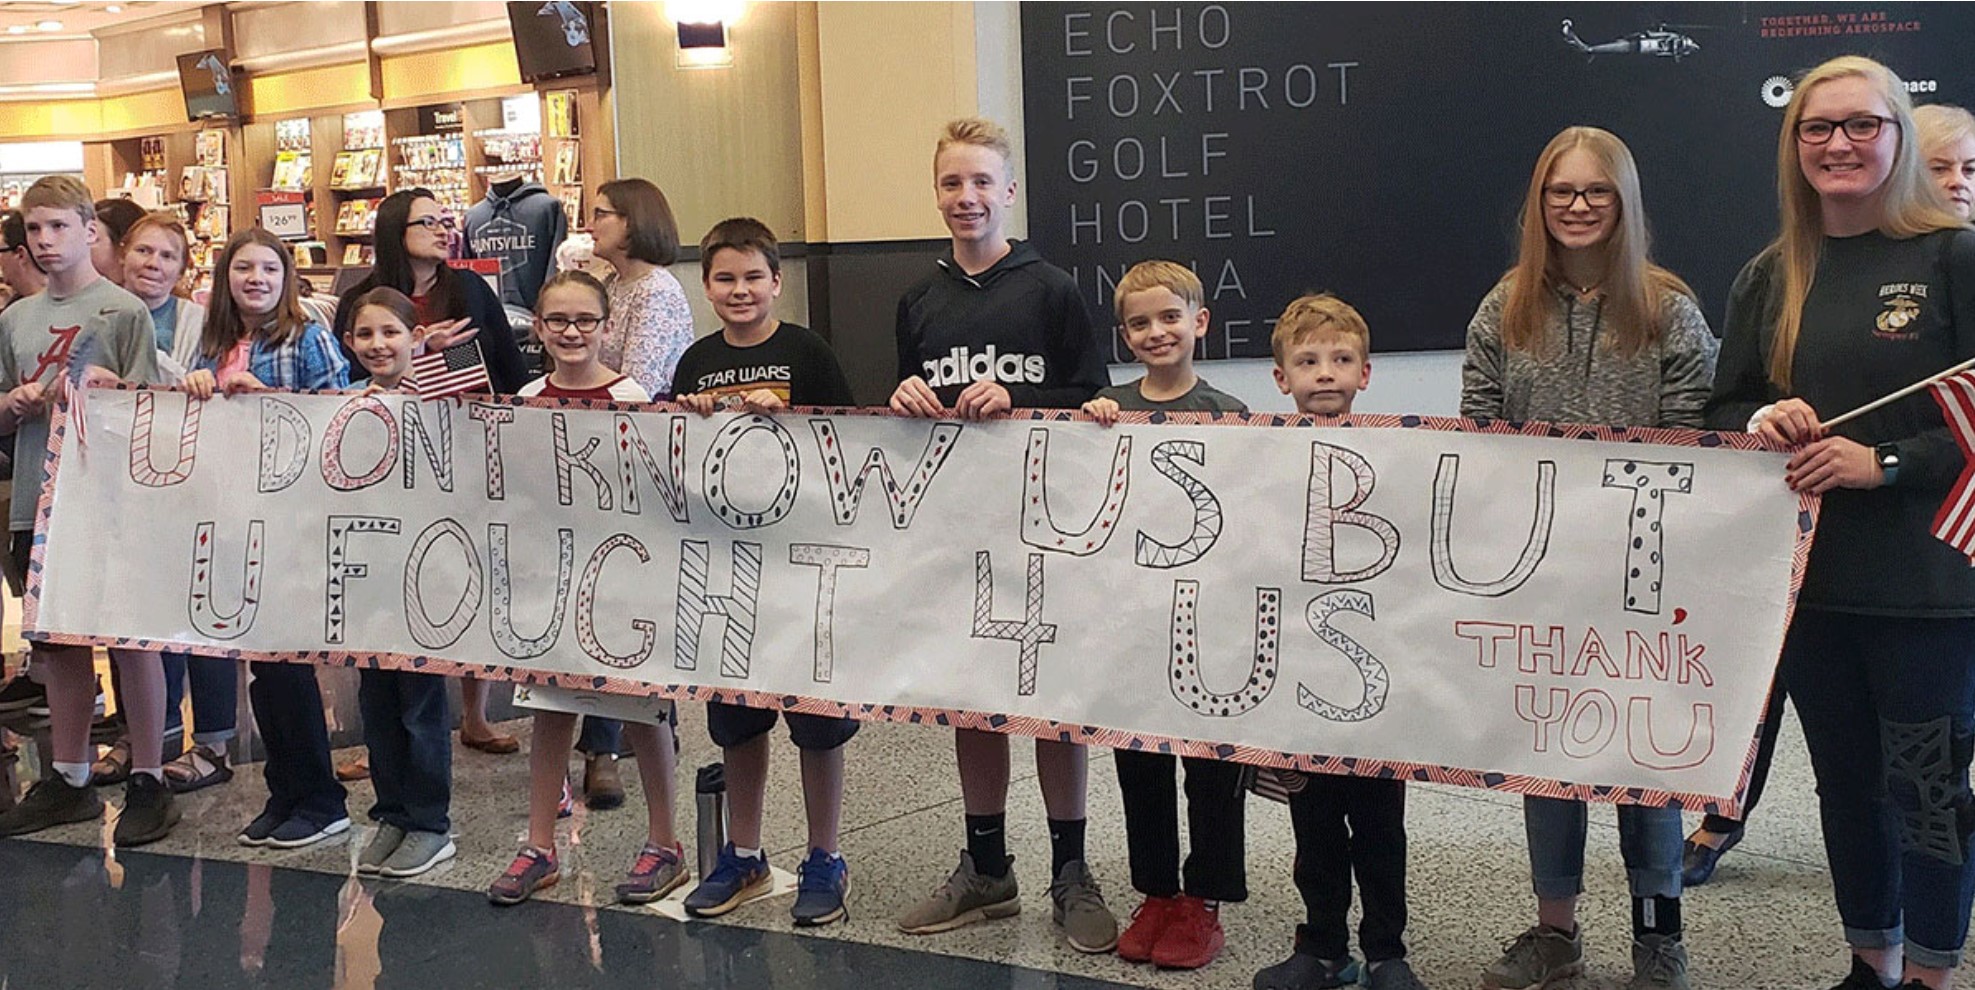 Semper Fi Community Task Force photo taken inside the Huntsville International Airport, shows children holding a long banner that says "You Don't Know Us But You Fought 4 Us" - to help welcome the Veterans and Caregivers participating in Heroes' Week 2022